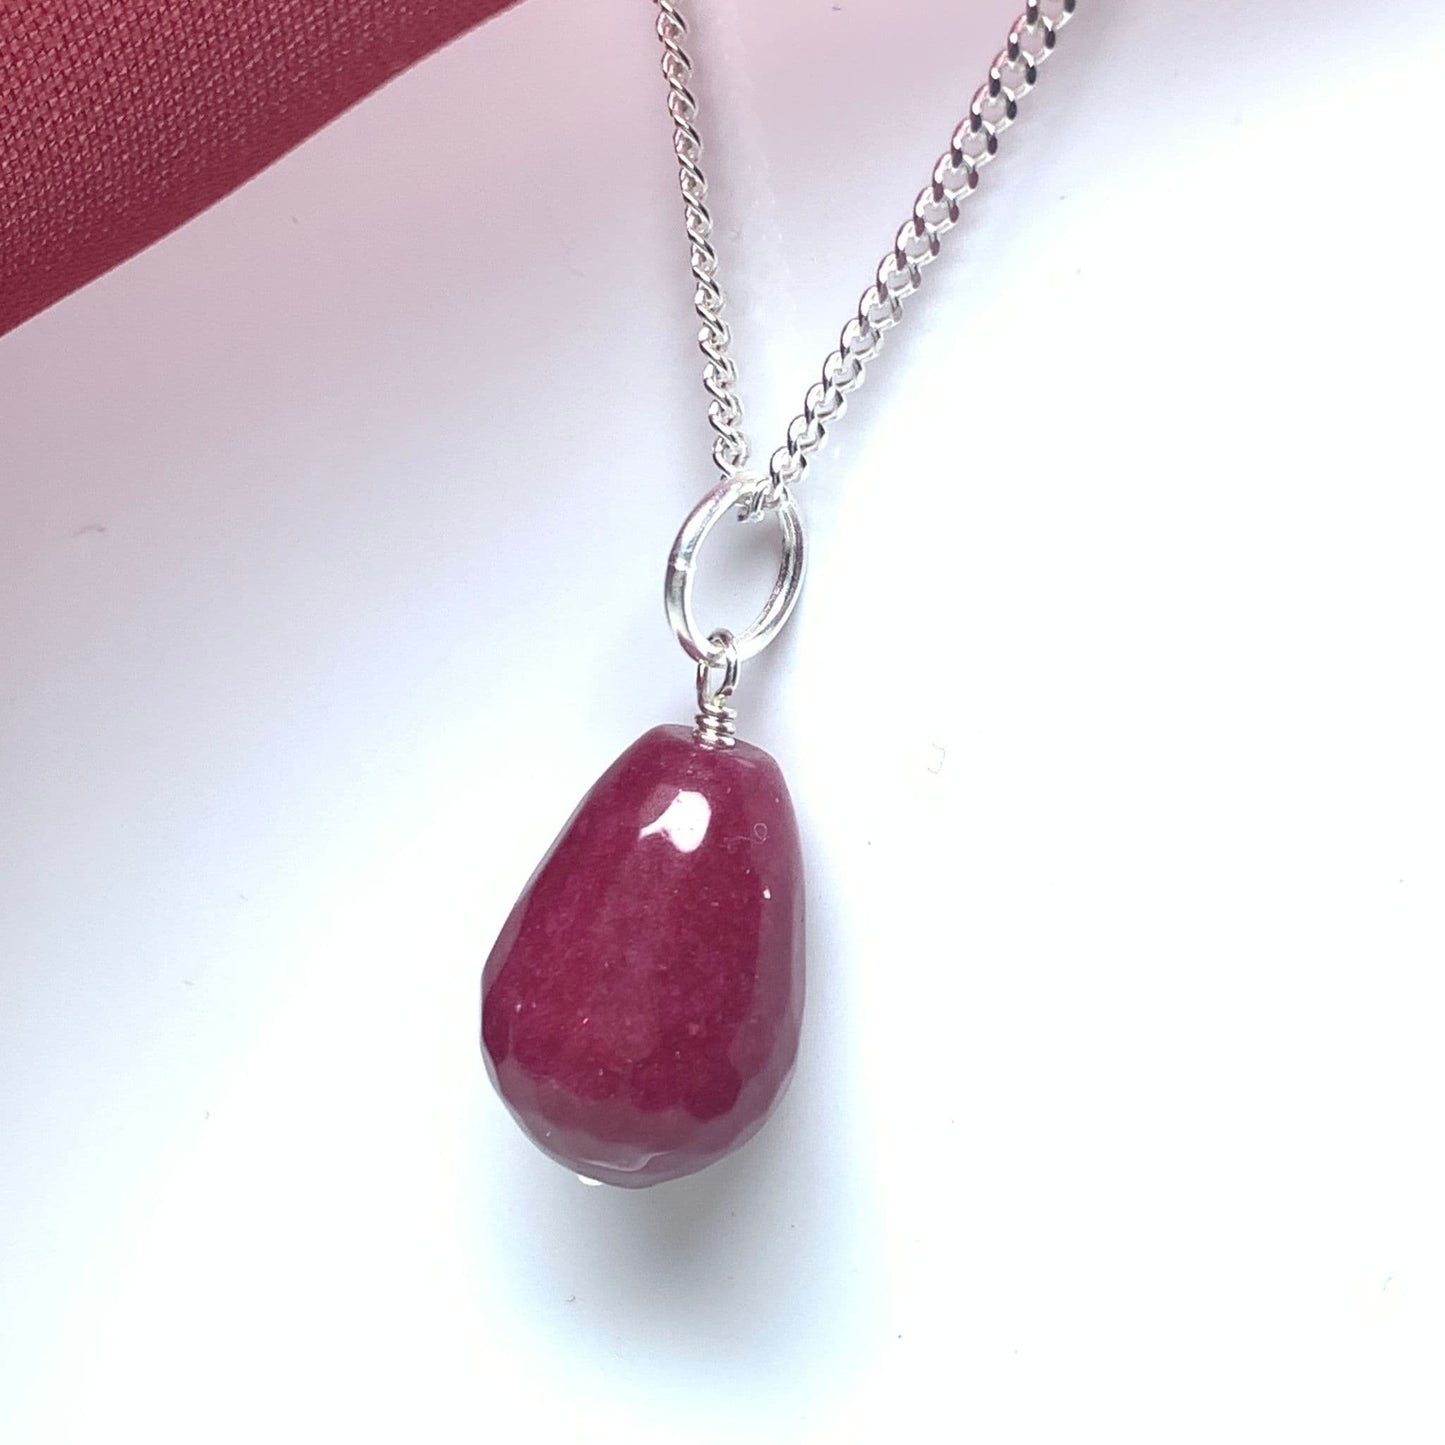 Tear Drop Silver Pear Shaped red Jade Necklace Pendant